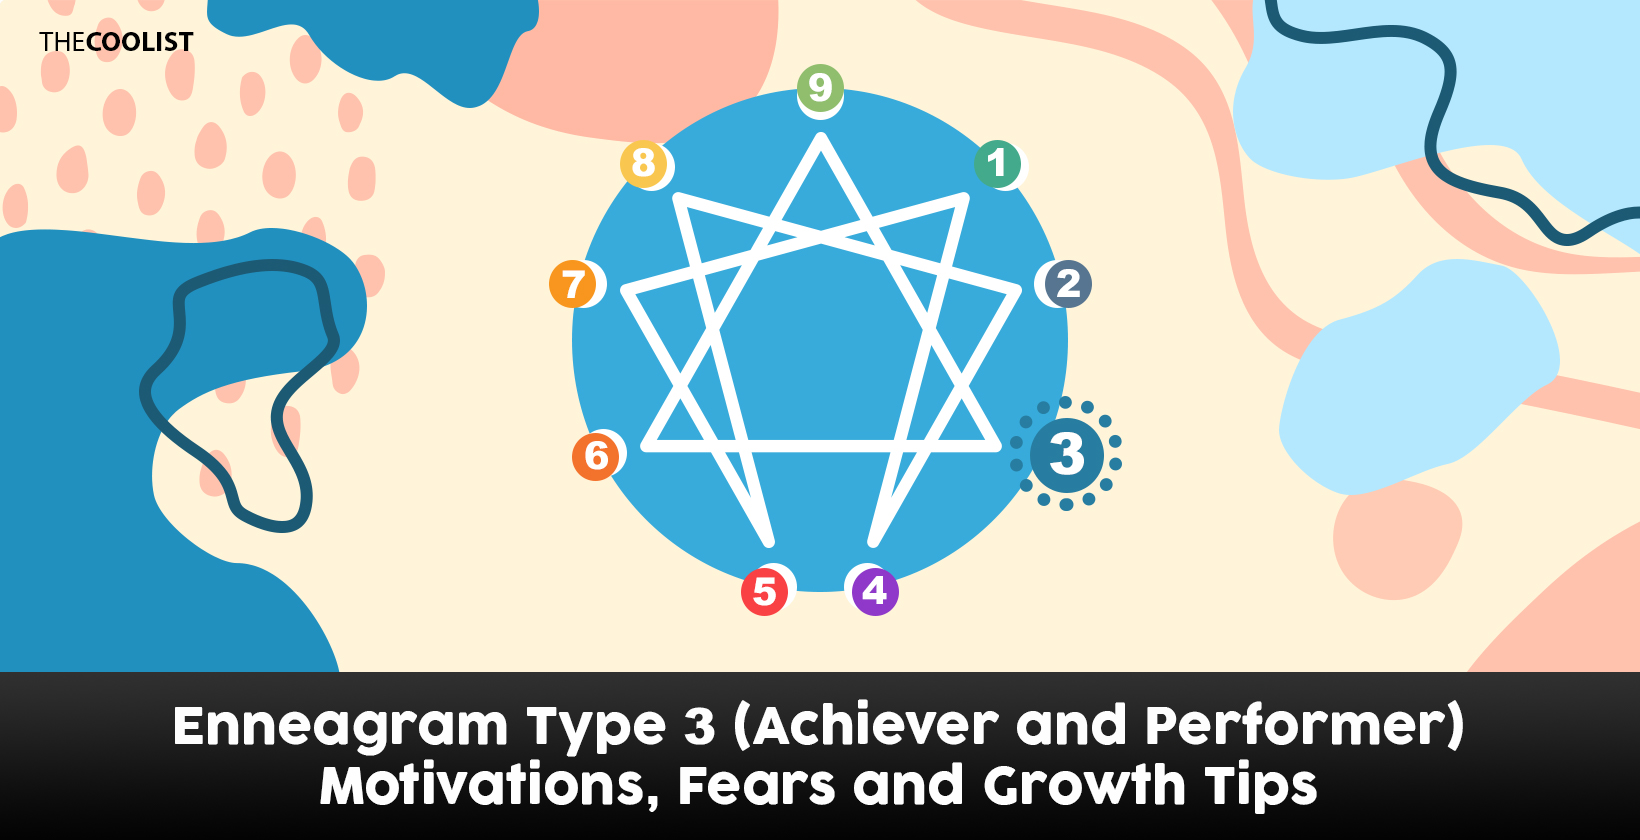 Enneagram Type 3: The Achiever and The Performer